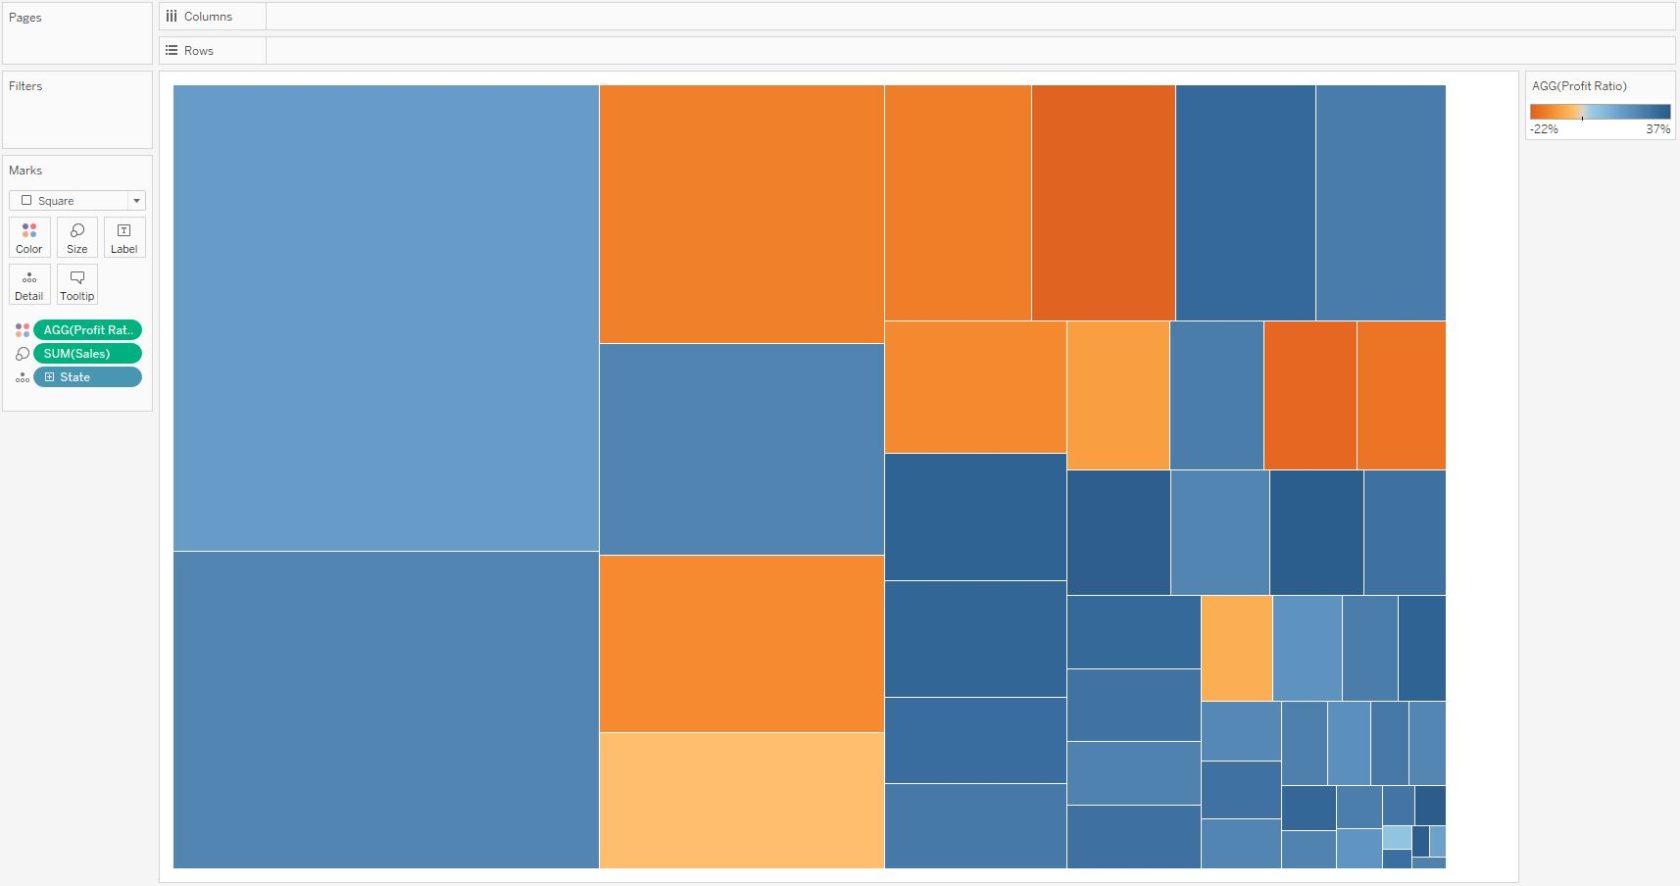 tableau-sales-and-profit-ratio-by-state-tree-map